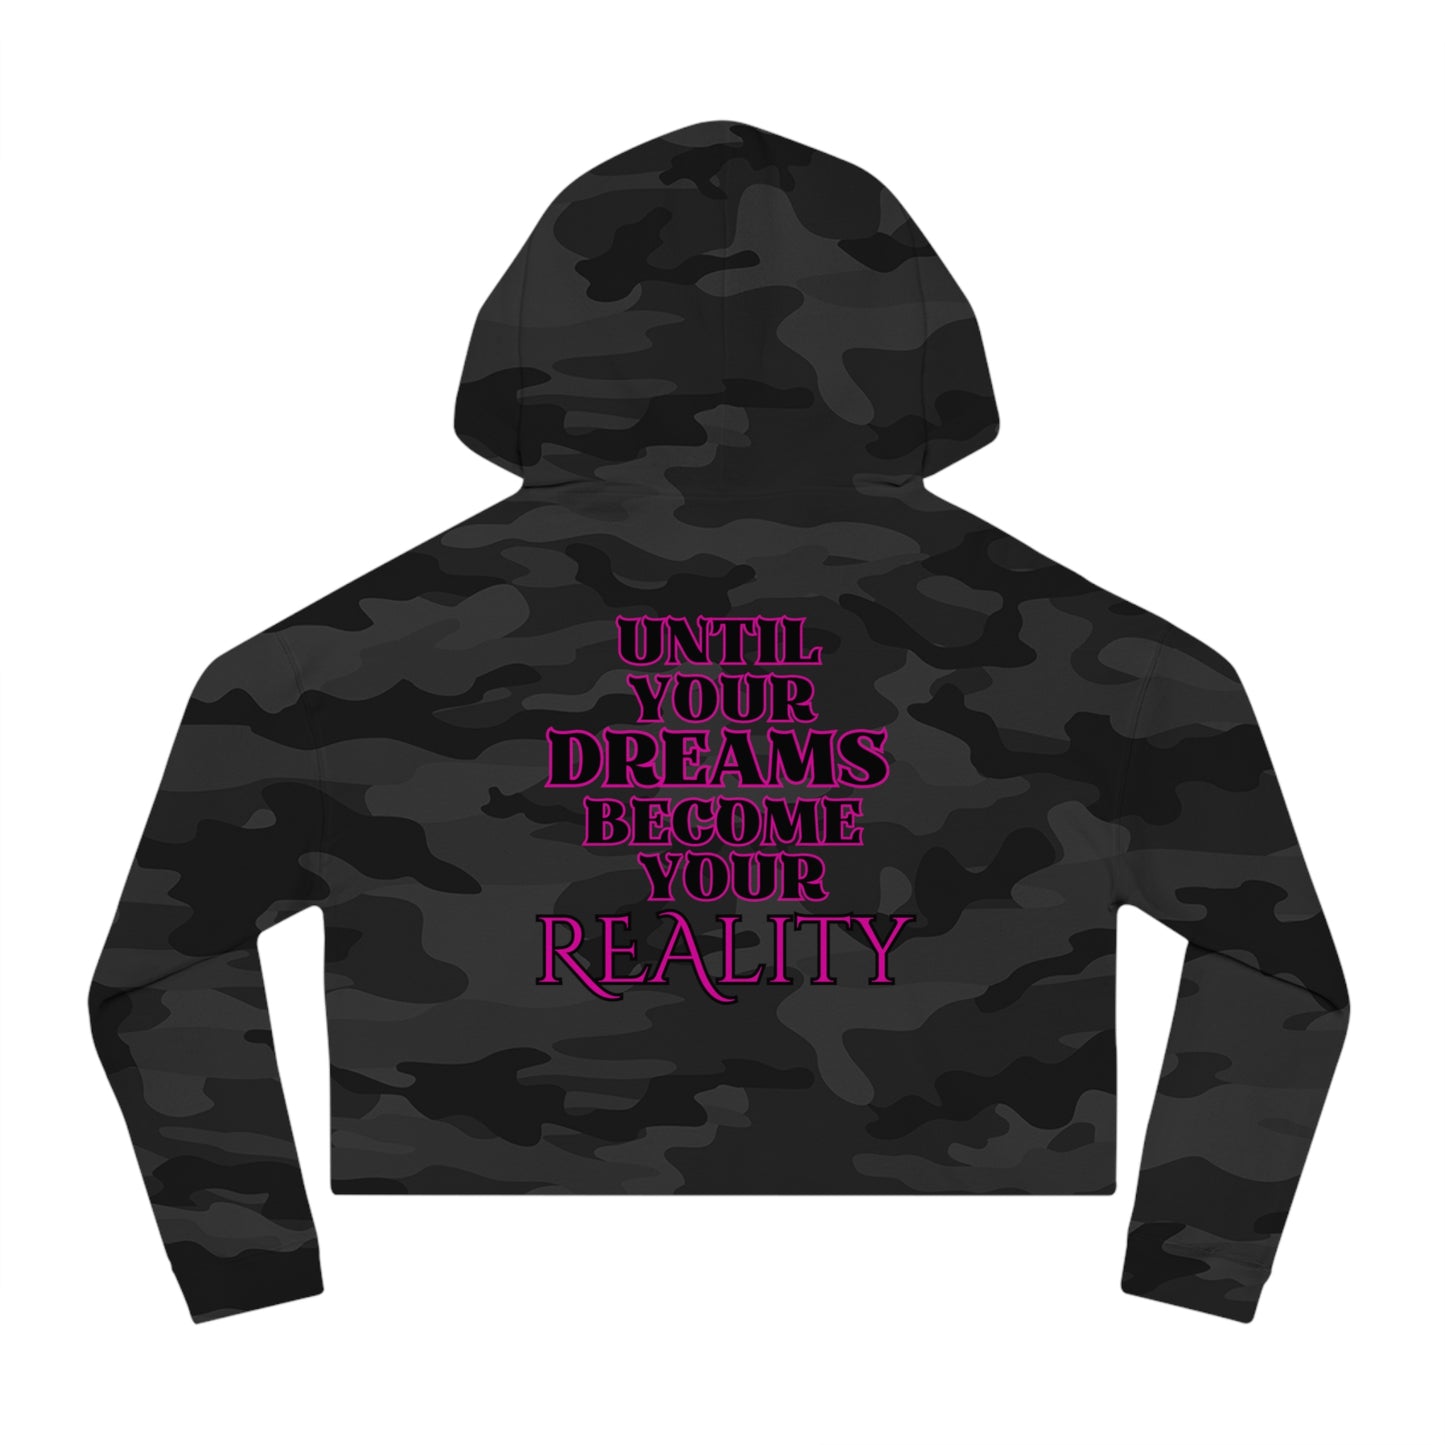 Empty the Clip Women’s Cropped Hoodie